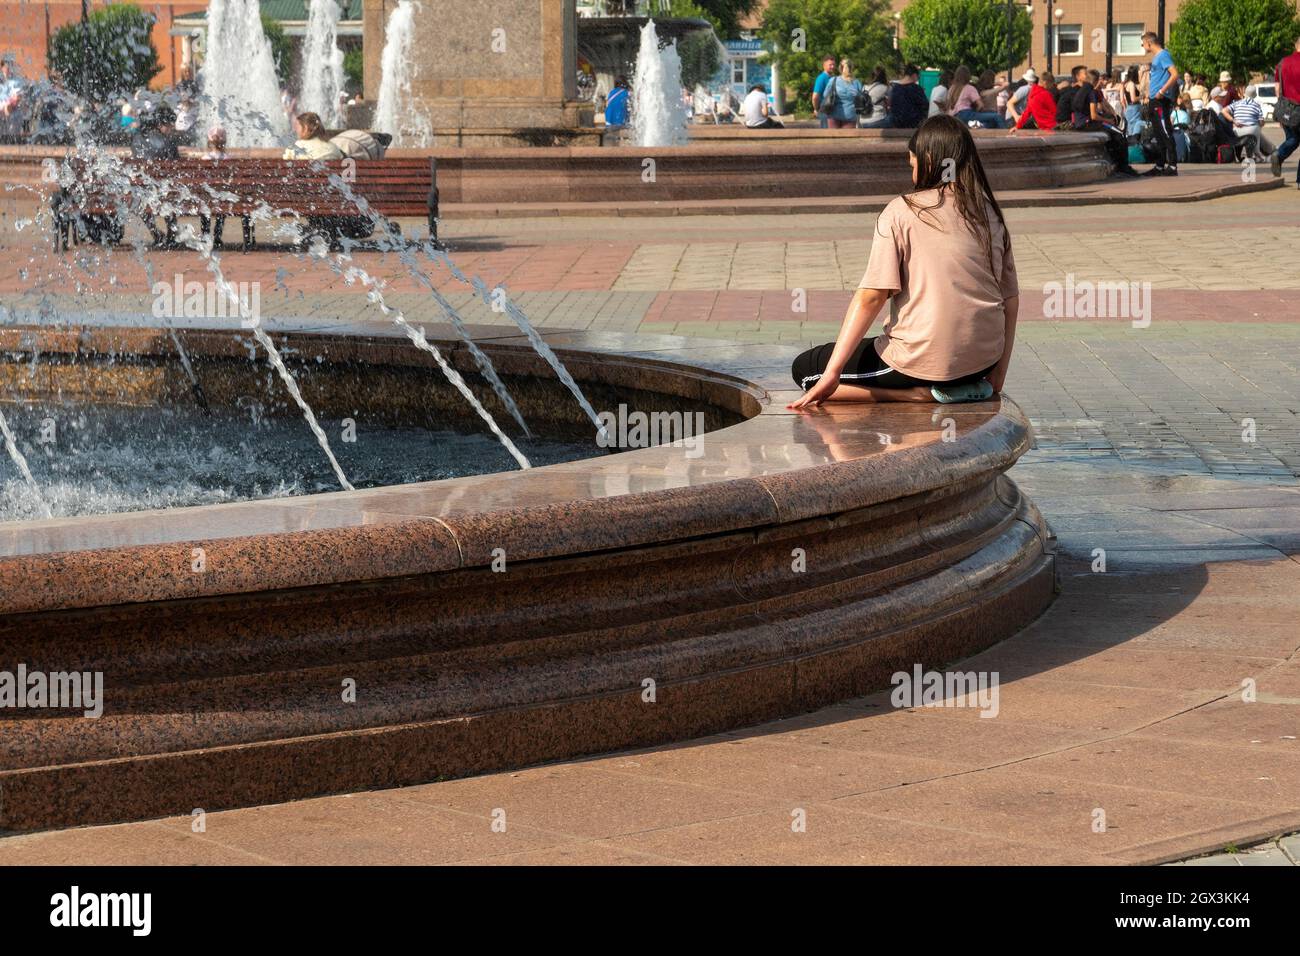 A young woman sits alone at the edge of a fountain in the Railway Station Square filled with people on a hot summer day. Stock Photo